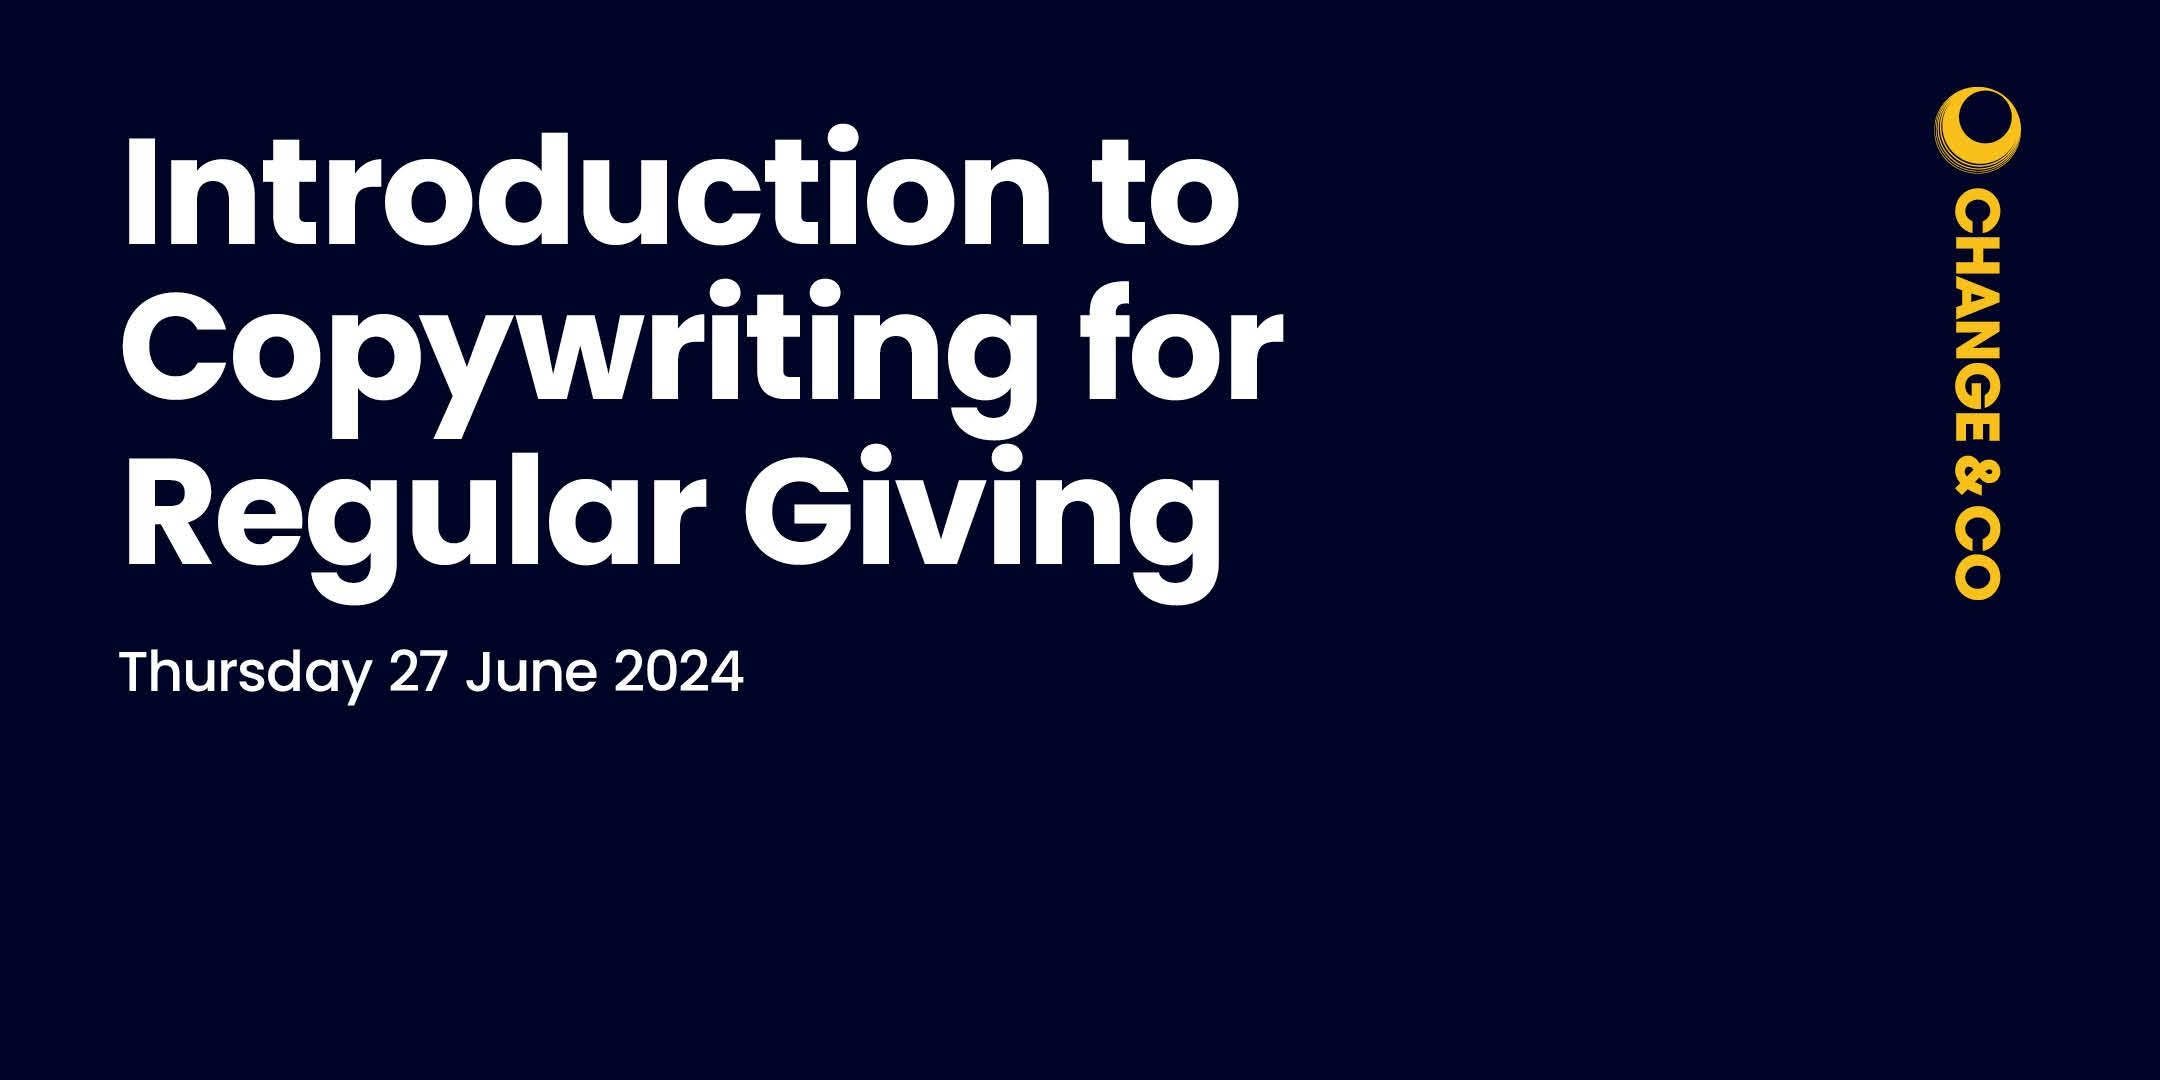 Introduction to Copywriting for Regular Giving